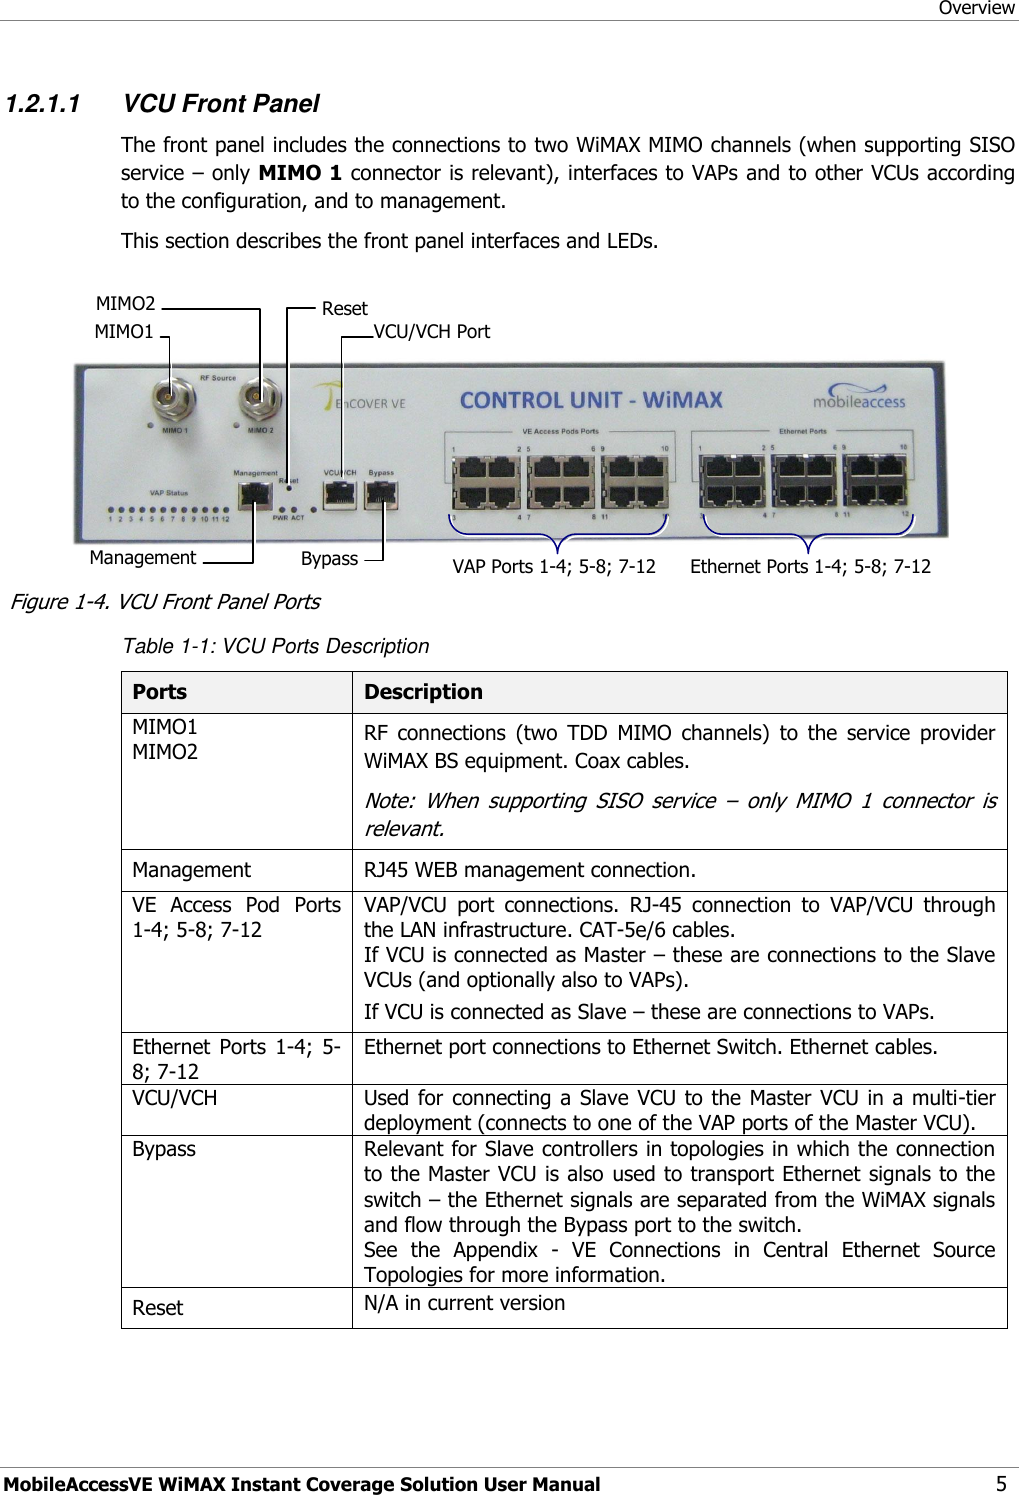 Overview MobileAccessVE WiMAX Instant Coverage Solution User Manual 5 1.2.1.1 VCU Front Panel The front panel includes the connections to two WiMAX MIMO channels (when supporting SISO service – only MIMO 1 connector is relevant), interfaces to VAPs and to other VCUs according to the configuration, and to management.  This section describes the front panel interfaces and LEDs.      Figure 1-4. VCU Front Panel Ports Table 1-1: VCU Ports Description Ports Description MIMO1 MIMO2 RF  connections  (two  TDD  MIMO  channels)  to  the  service  provider WiMAX BS equipment. Coax cables. Note:  When  supporting  SISO  service  –  only  MIMO  1  connector  is relevant. Management RJ45 WEB management connection. VE  Access  Pod  Ports 1-4; 5-8; 7-12 VAP/VCU  port  connections.  RJ-45  connection  to  VAP/VCU  through the LAN infrastructure. CAT-5e/6 cables. If VCU is connected as Master – these are connections to the Slave VCUs (and optionally also to VAPs). If VCU is connected as Slave – these are connections to VAPs. Ethernet  Ports  1-4;  5-8; 7-12  Ethernet port connections to Ethernet Switch. Ethernet cables. VCU/VCH Used for  connecting a  Slave VCU  to the Master VCU in  a multi-tier deployment (connects to one of the VAP ports of the Master VCU). Bypass Relevant for Slave controllers in topologies in which the connection to the Master VCU is also used to transport Ethernet signals to the switch – the Ethernet signals are separated from the WiMAX signals and flow through the Bypass port to the switch. See  the  Appendix  -  VE  Connections  in  Central  Ethernet  Source Topologies for more information.    Reset N/A in current version Reset Management  MIMO1  MIMO2  Ethernet Ports 1-4; 5-8; 7-12 VAP Ports 1-4; 5-8; 7-12 VCU/VCH Port   Bypass 